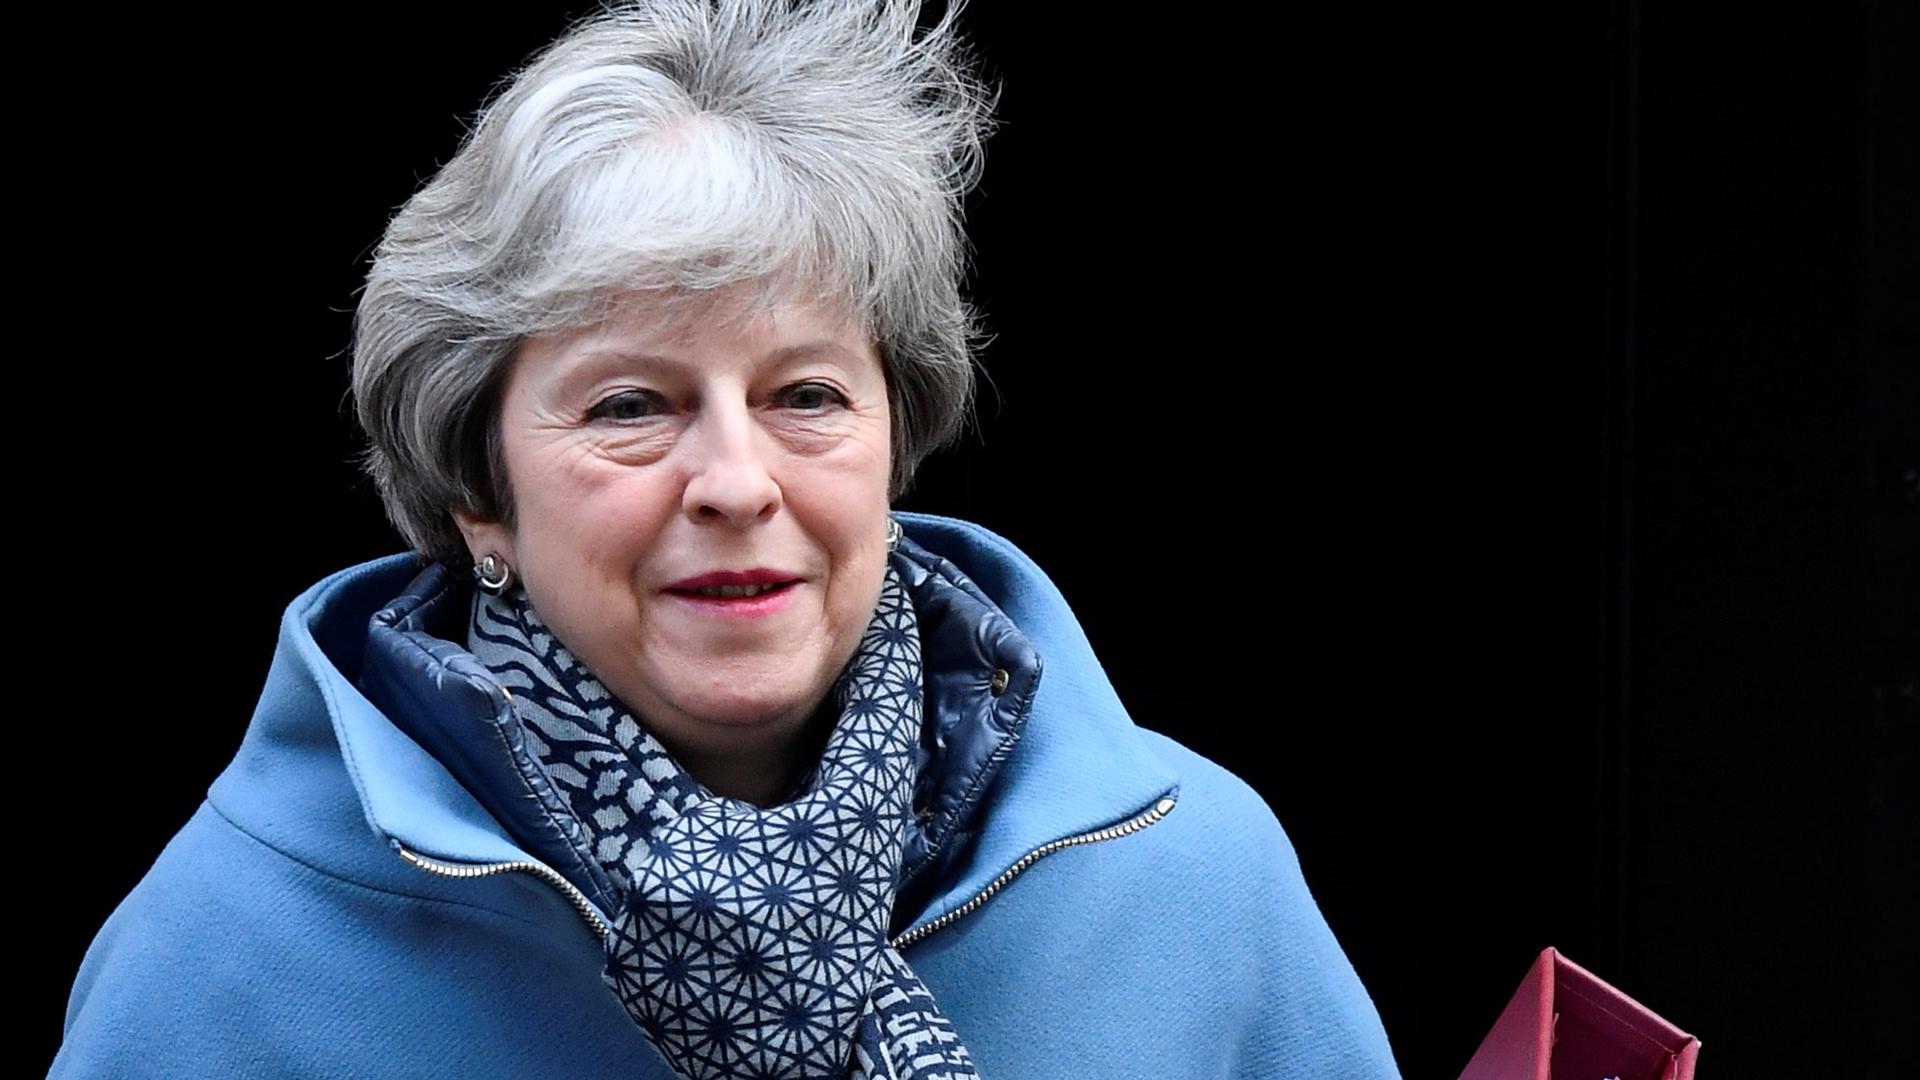 Britain's Prime Minister Theresa May shown leaving Downing Street wearing a blue jacket and scarf while carrying a red binder.